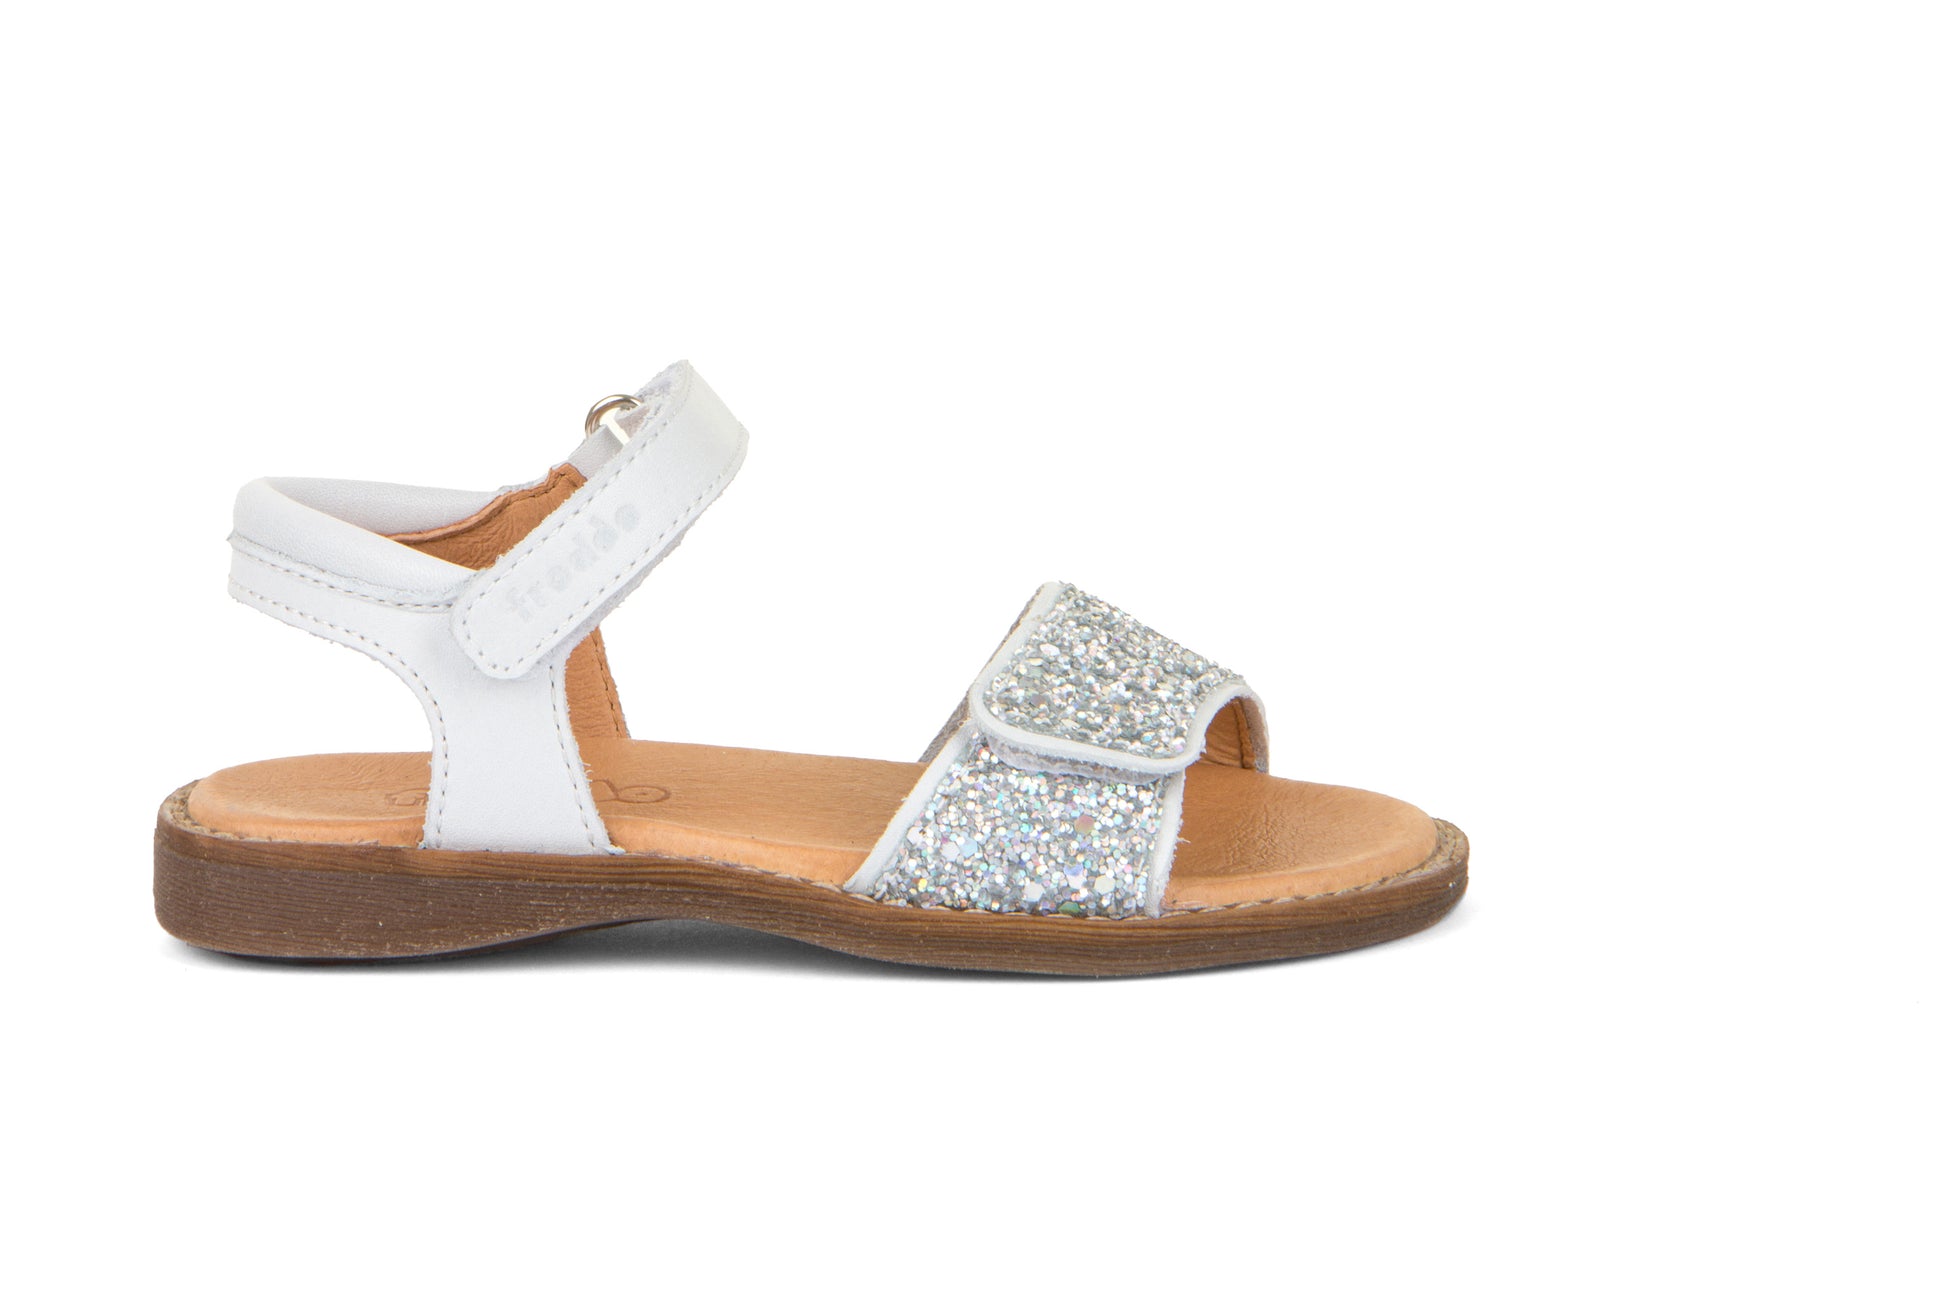 A girls sandal by Froddo, style G3150226-5 Lore Sparkle, in white with silver glitter strap, velcro fastening. Right side view.